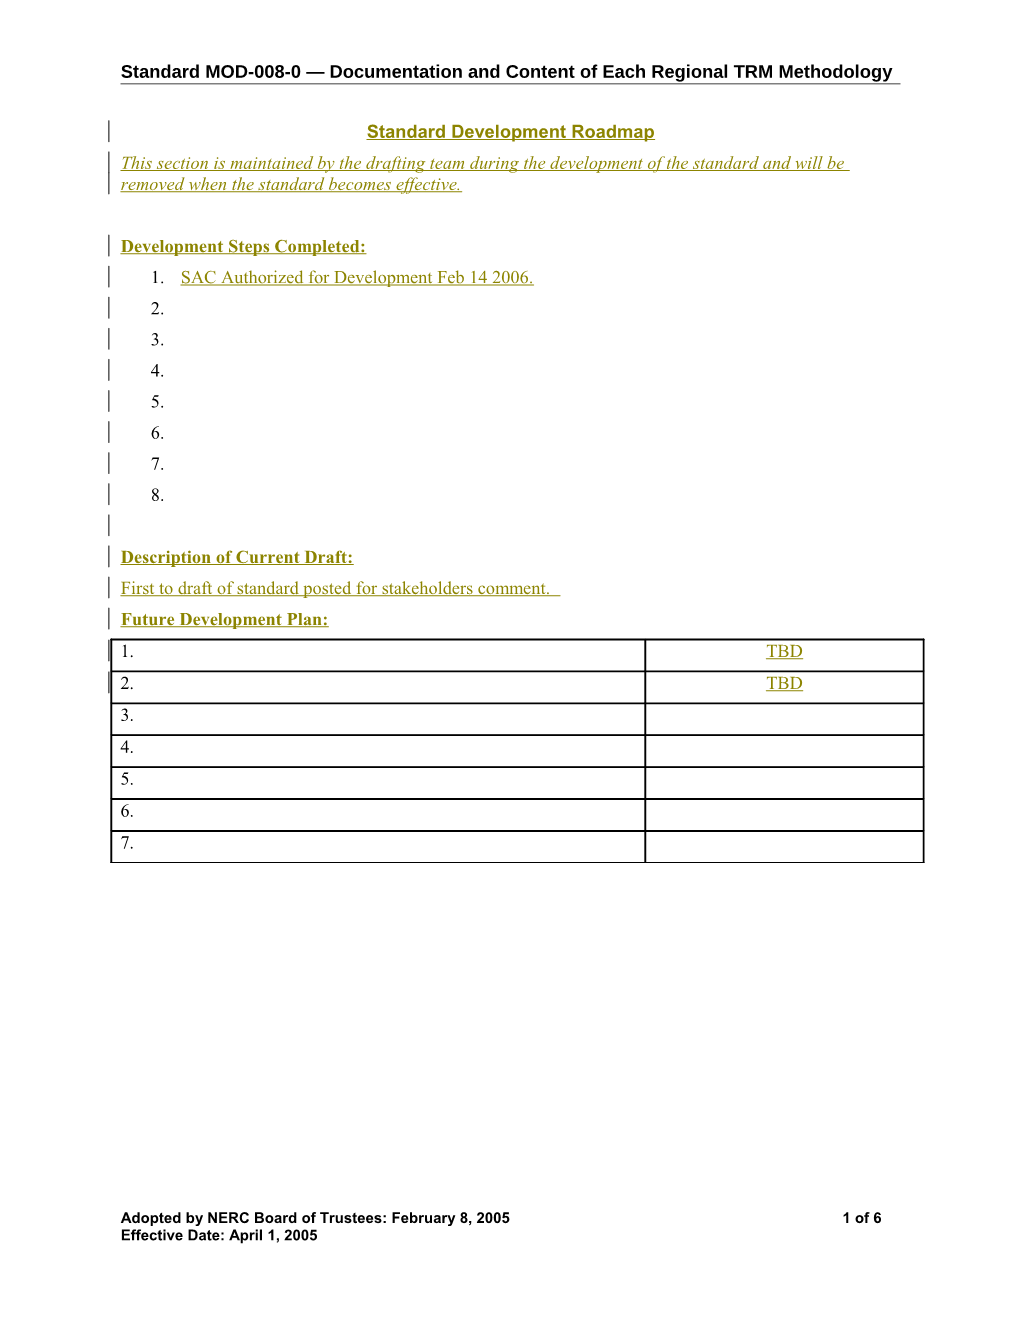 Standard MOD-008-0 Documentation and Content of Each Regional TRM Methodology